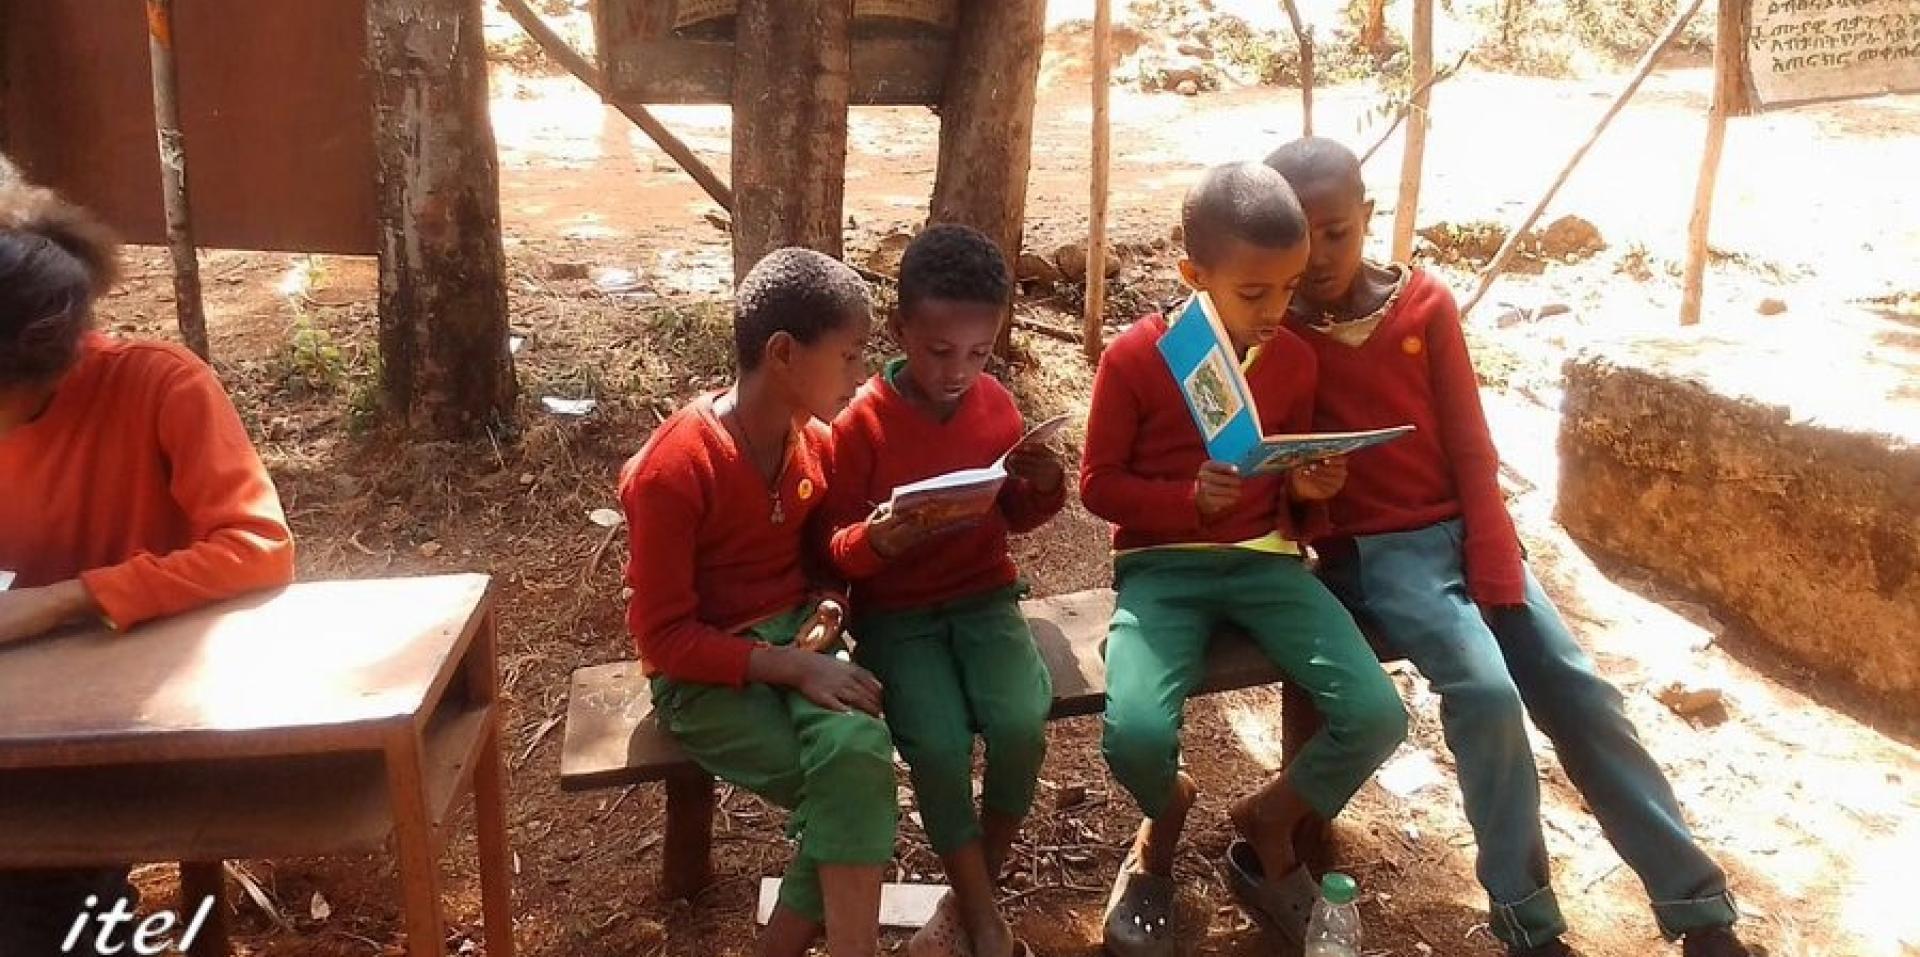 A group of young boys sits on a bench outside reading books